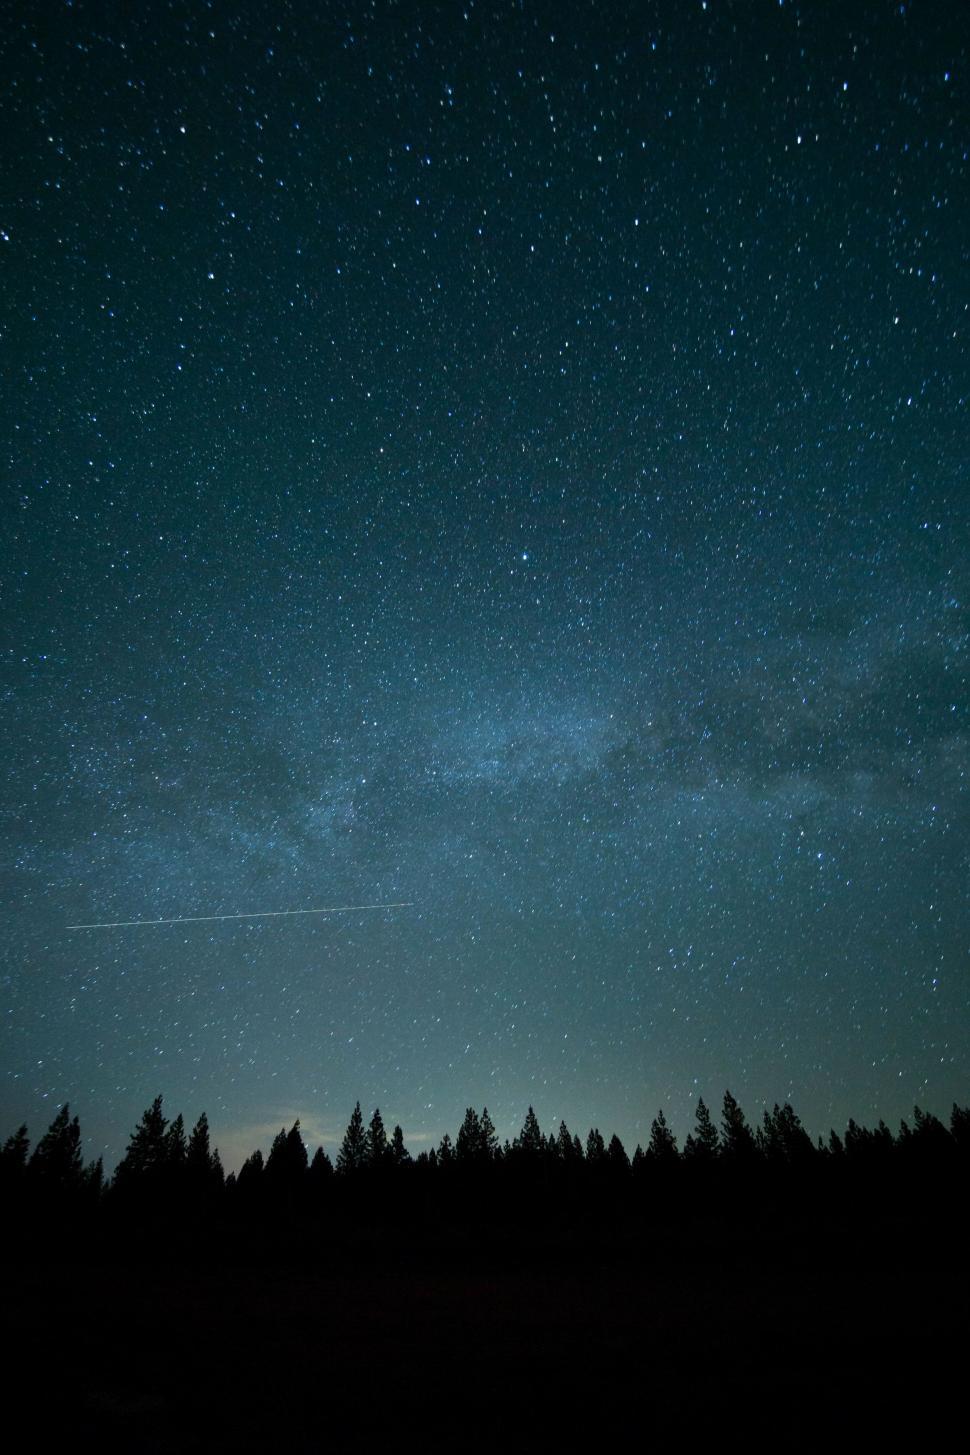 Free Image of Starry Night Sky With Trees in Foreground 